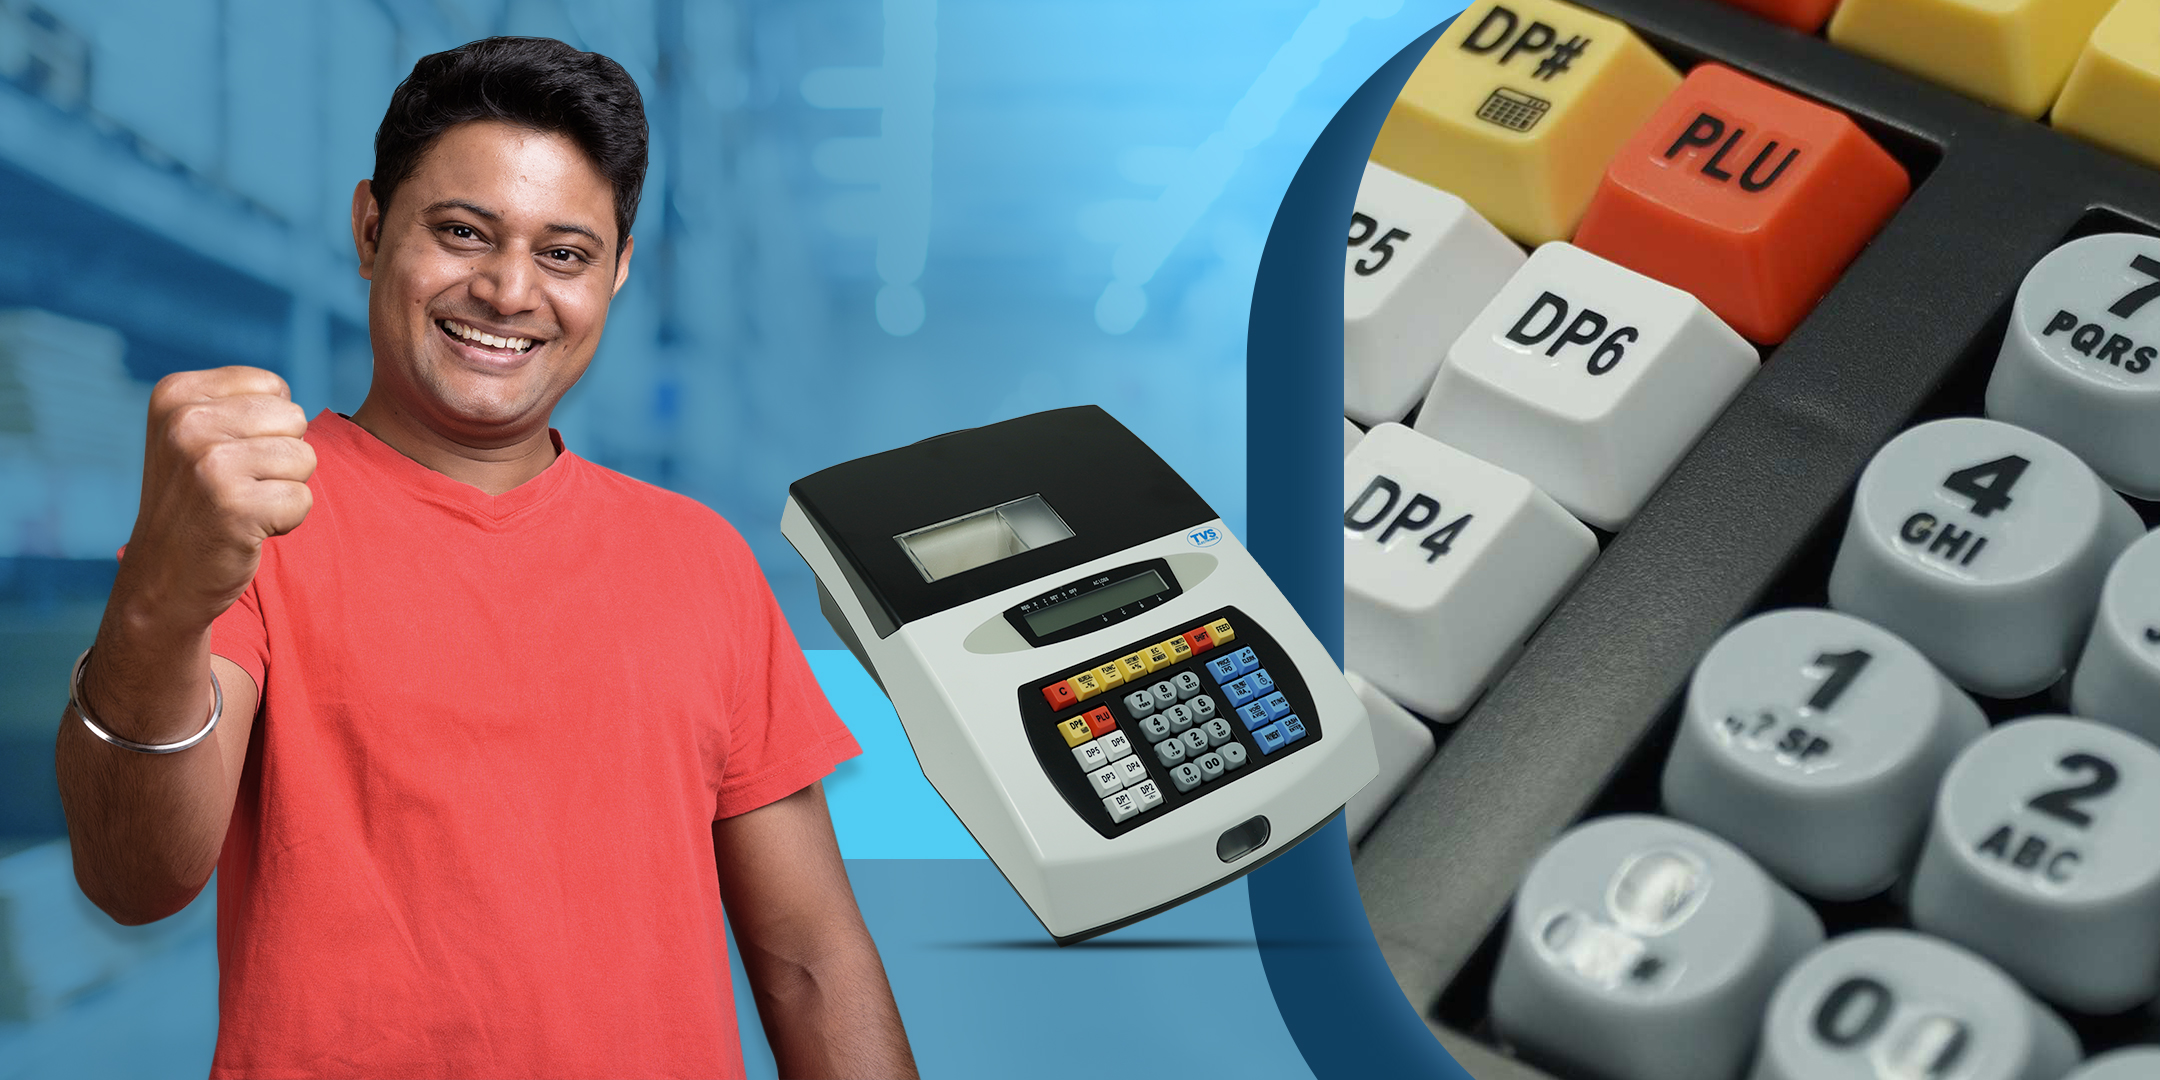 6 Top Things to Consider When Choosing the Right Cash Register for your Business